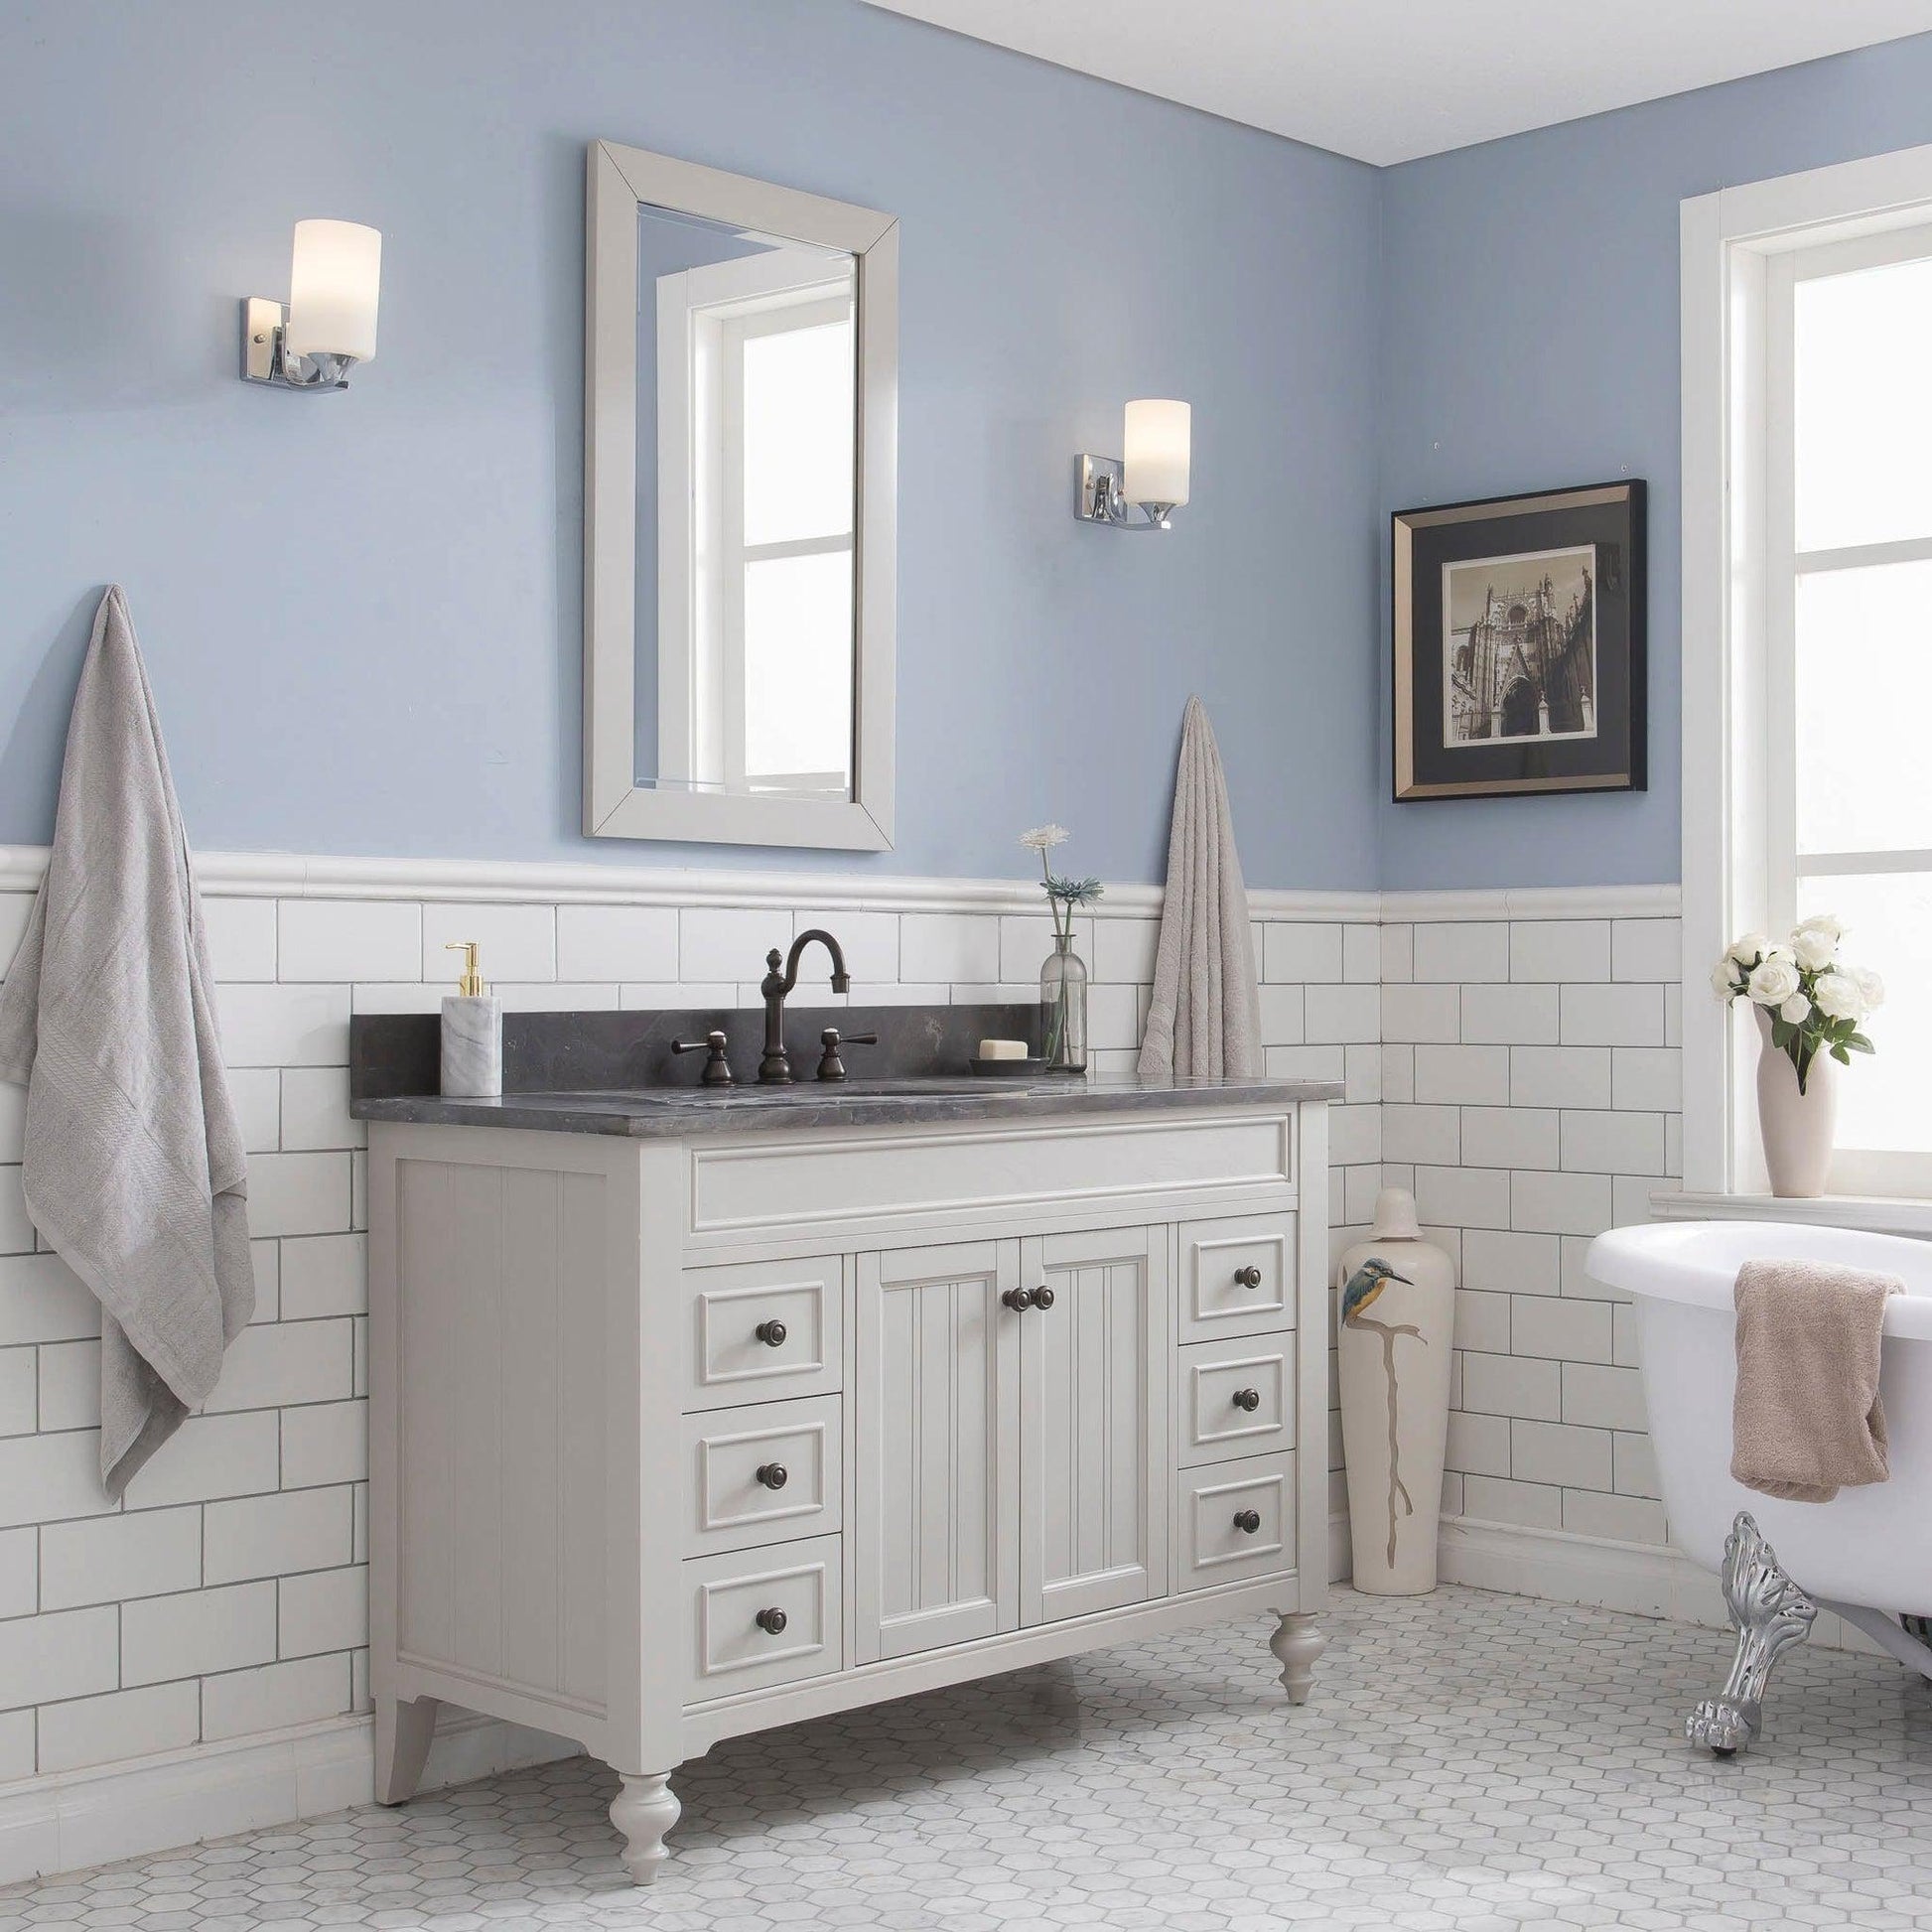 Water Creation Potenza 48" Bathroom Vanity in Earl Grey with Blue Limestone Top with Faucet and Mirror